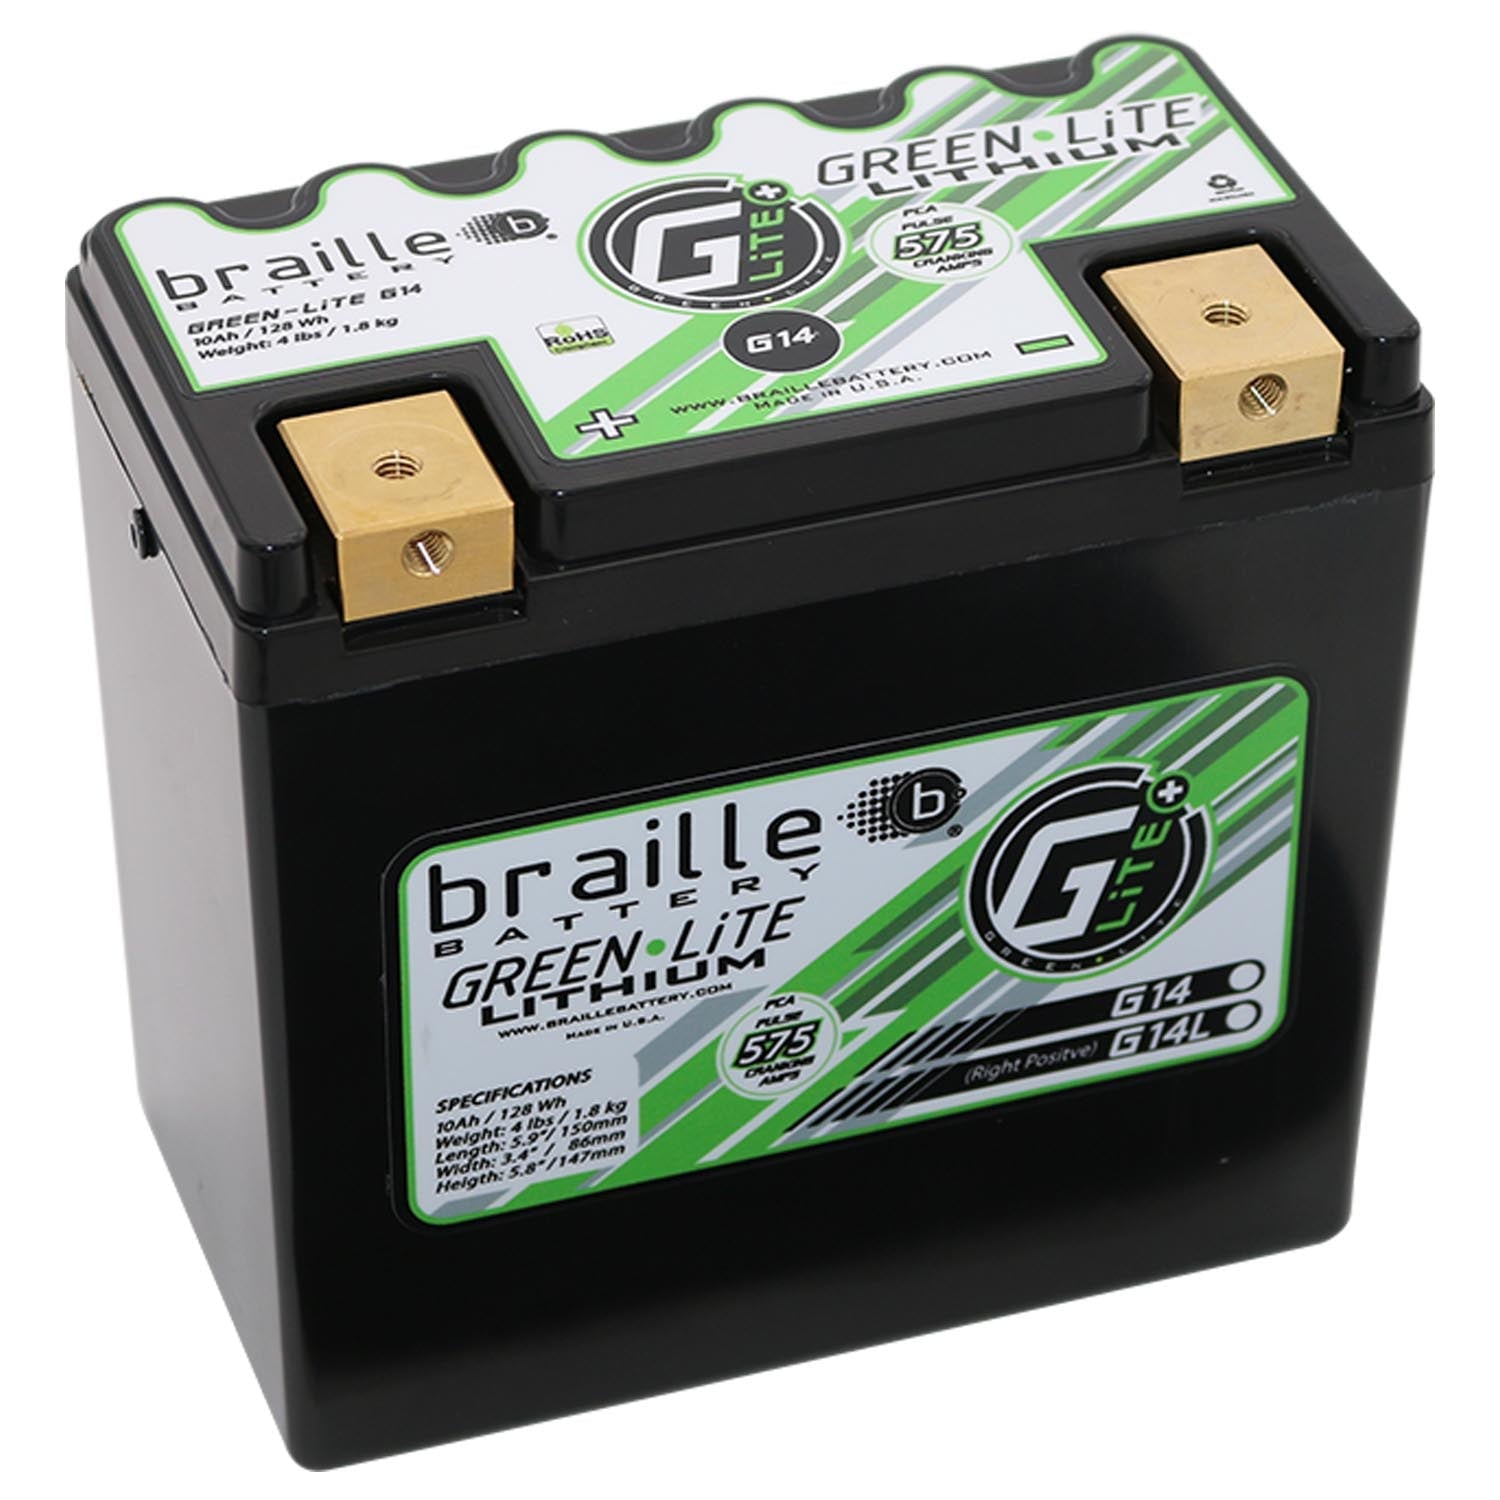 G14S Green-Lite Lithium-Ion 12 V Powersports Battery, BCI Group: 14L, Pulse Cranking Amps (PCA): 697 - Right Side Positive